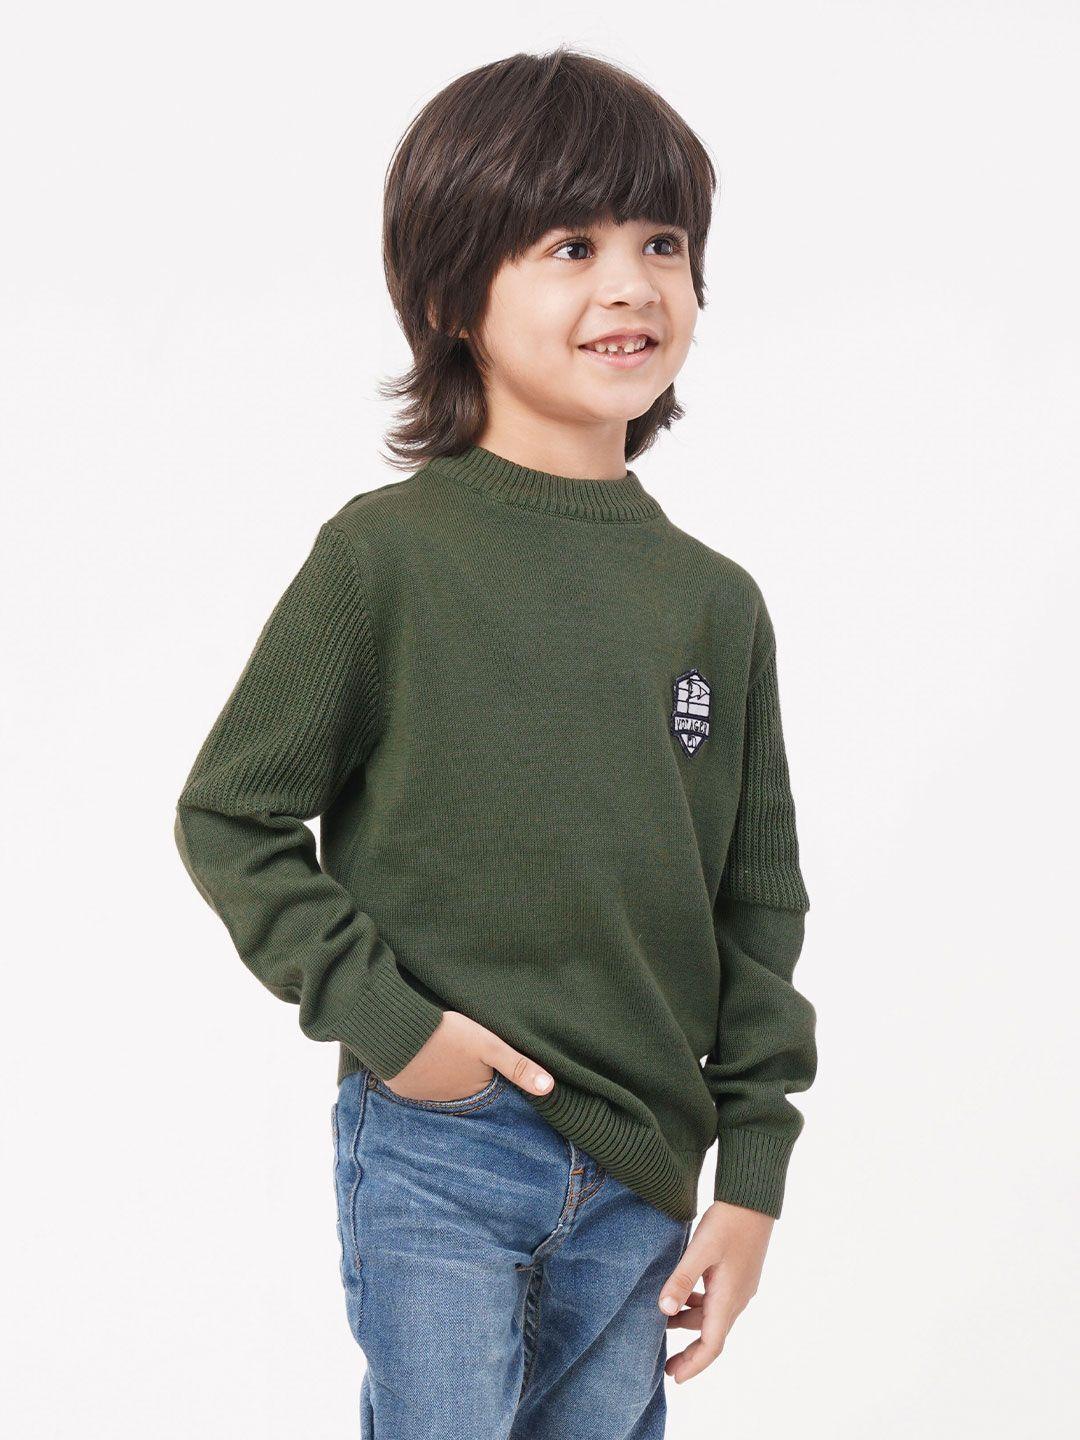 ed-a-mamma-kids-boys-olive-green-long-sleeves-pleated-pullover-sweater